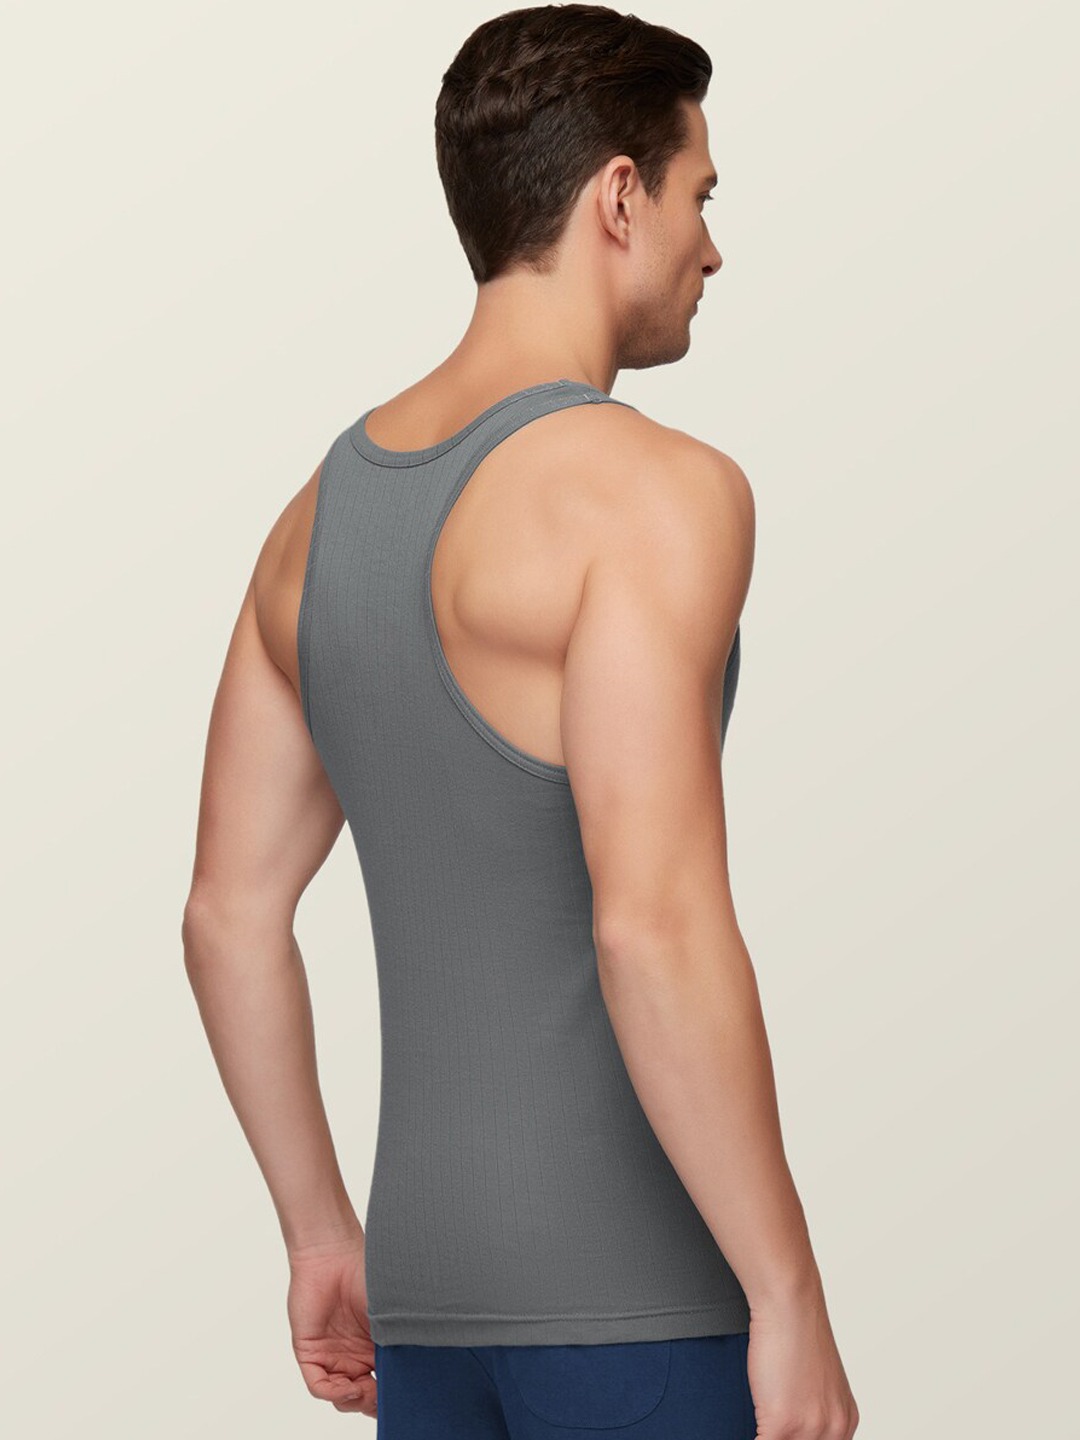 Clothing Innerwear Vests | XYXX Men White & Steel Grey Anti-Microbial Super Combed Cotton Round Neck Ribbed Vest - NF09997